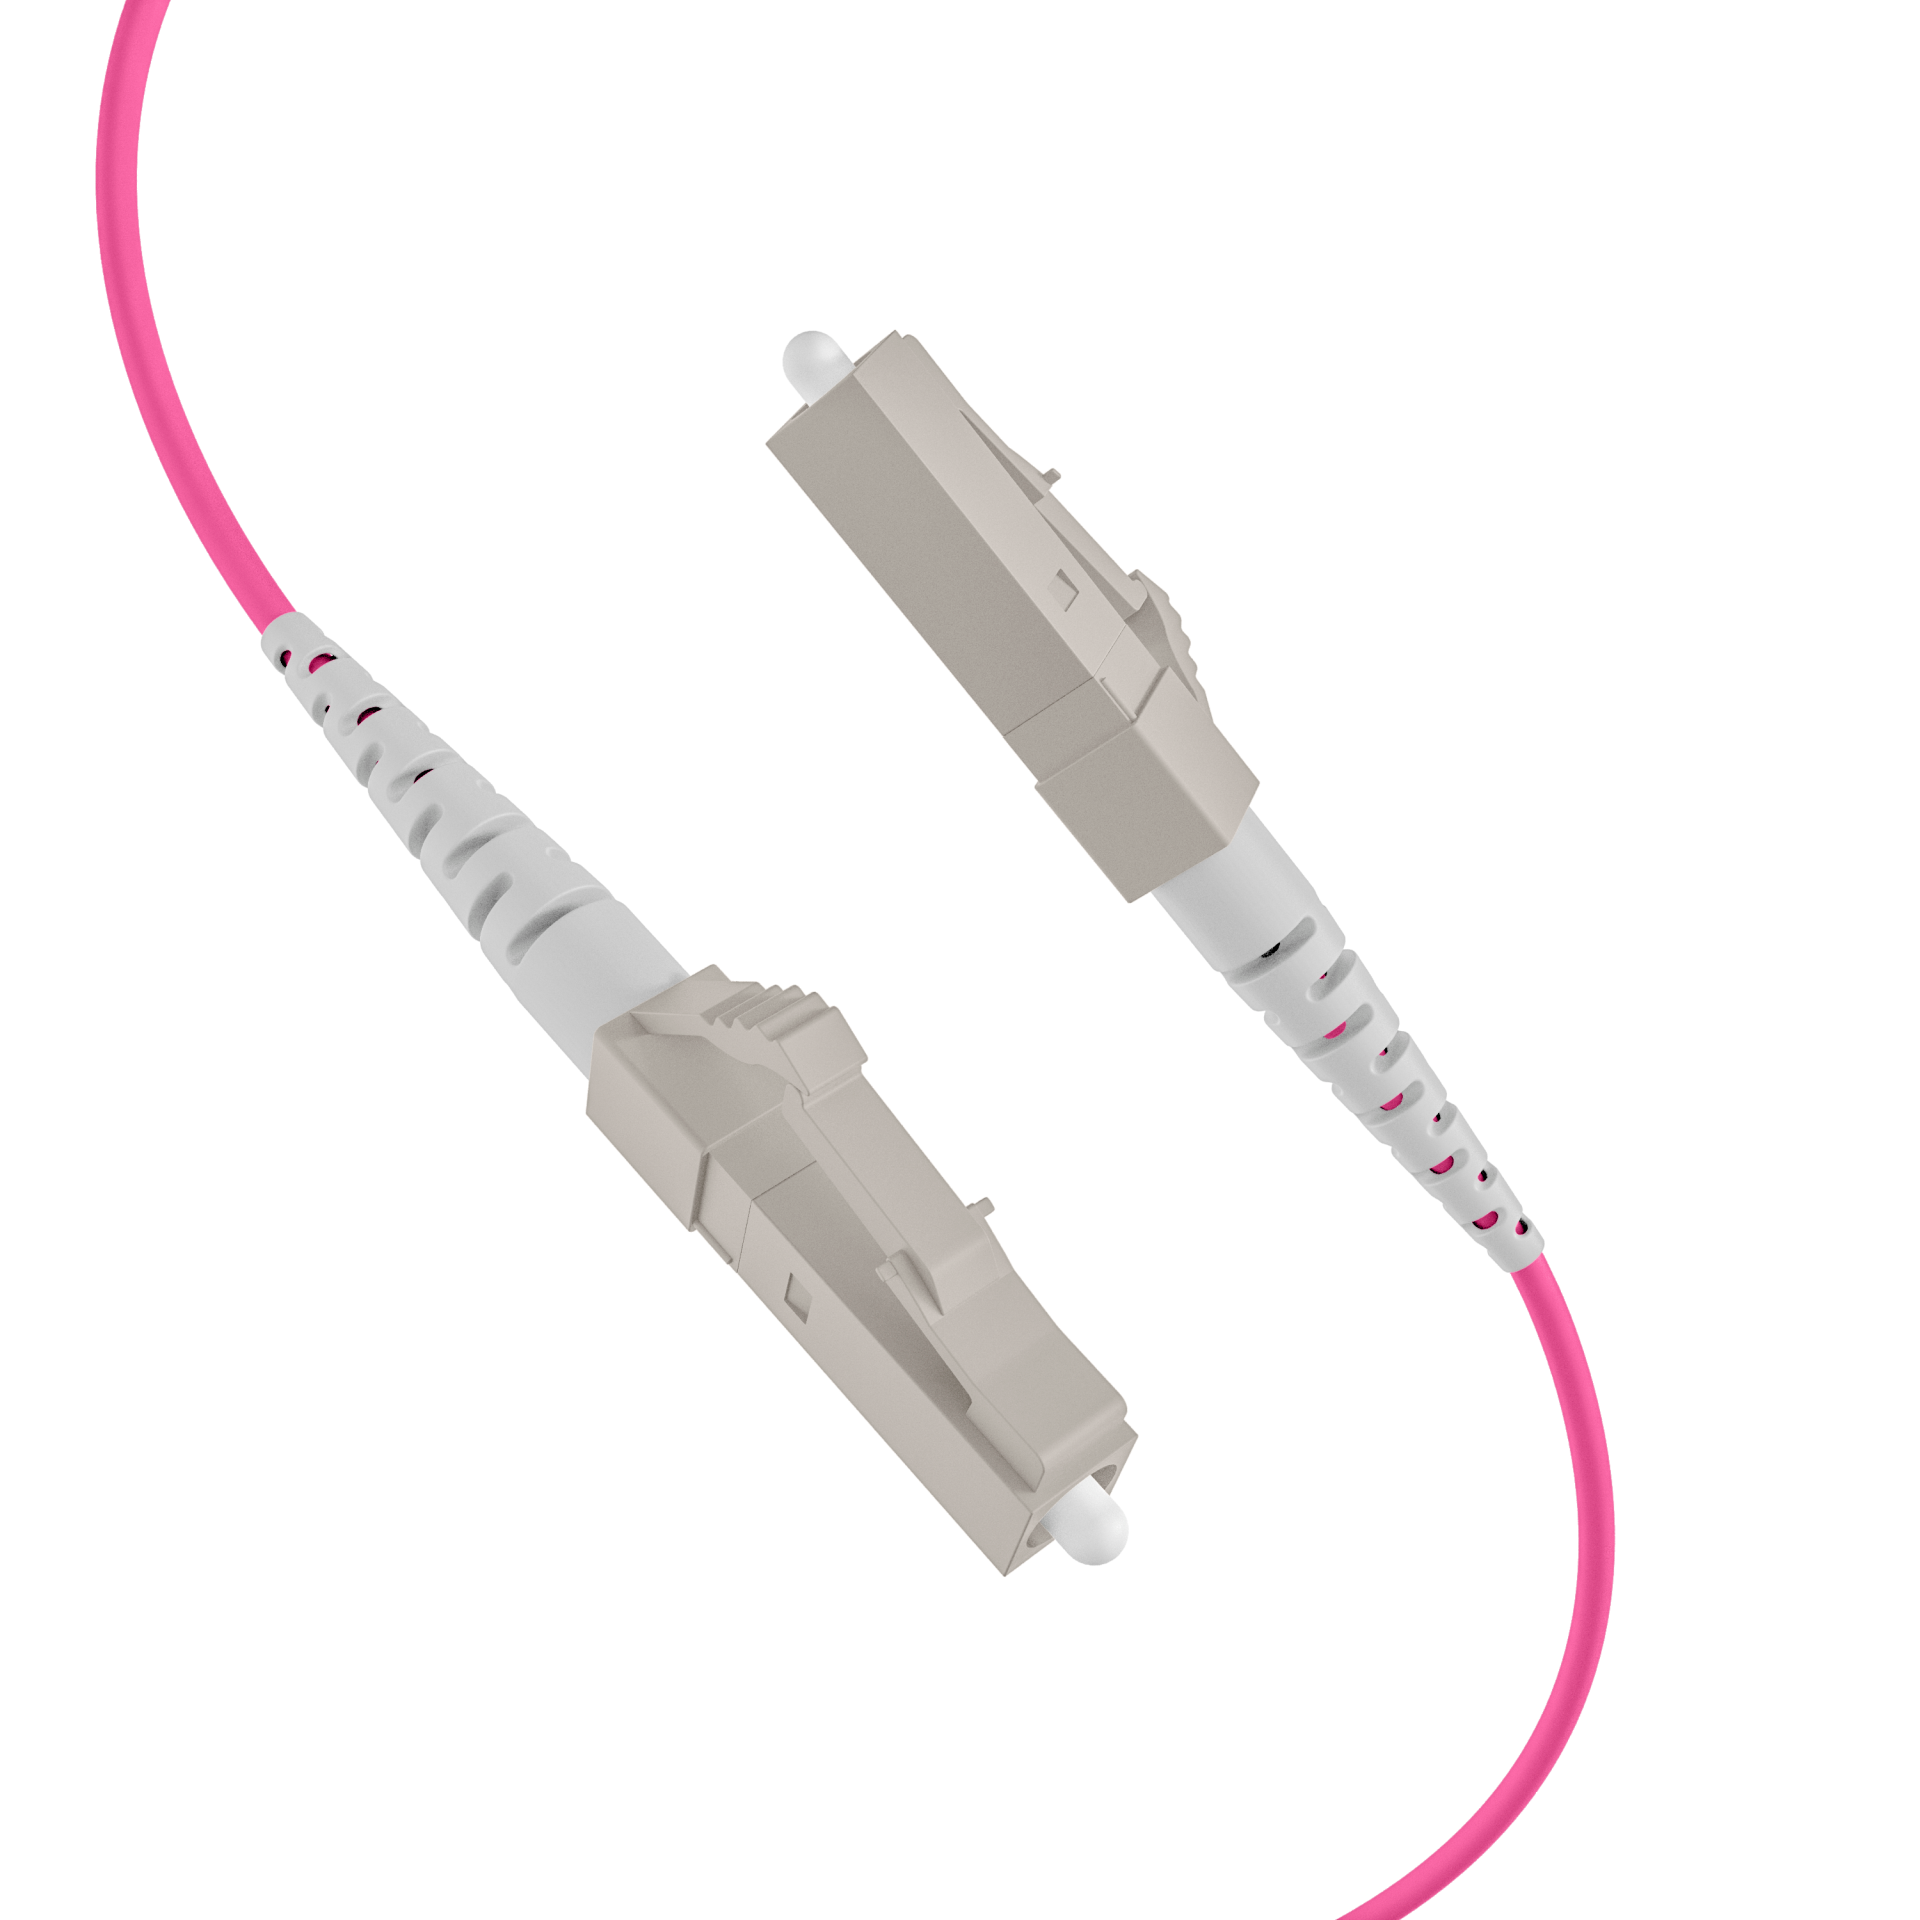 Trunkcable U-DQ(ZN)BH OM4 8G (1x8) LC-LC,20m Dca LSZH